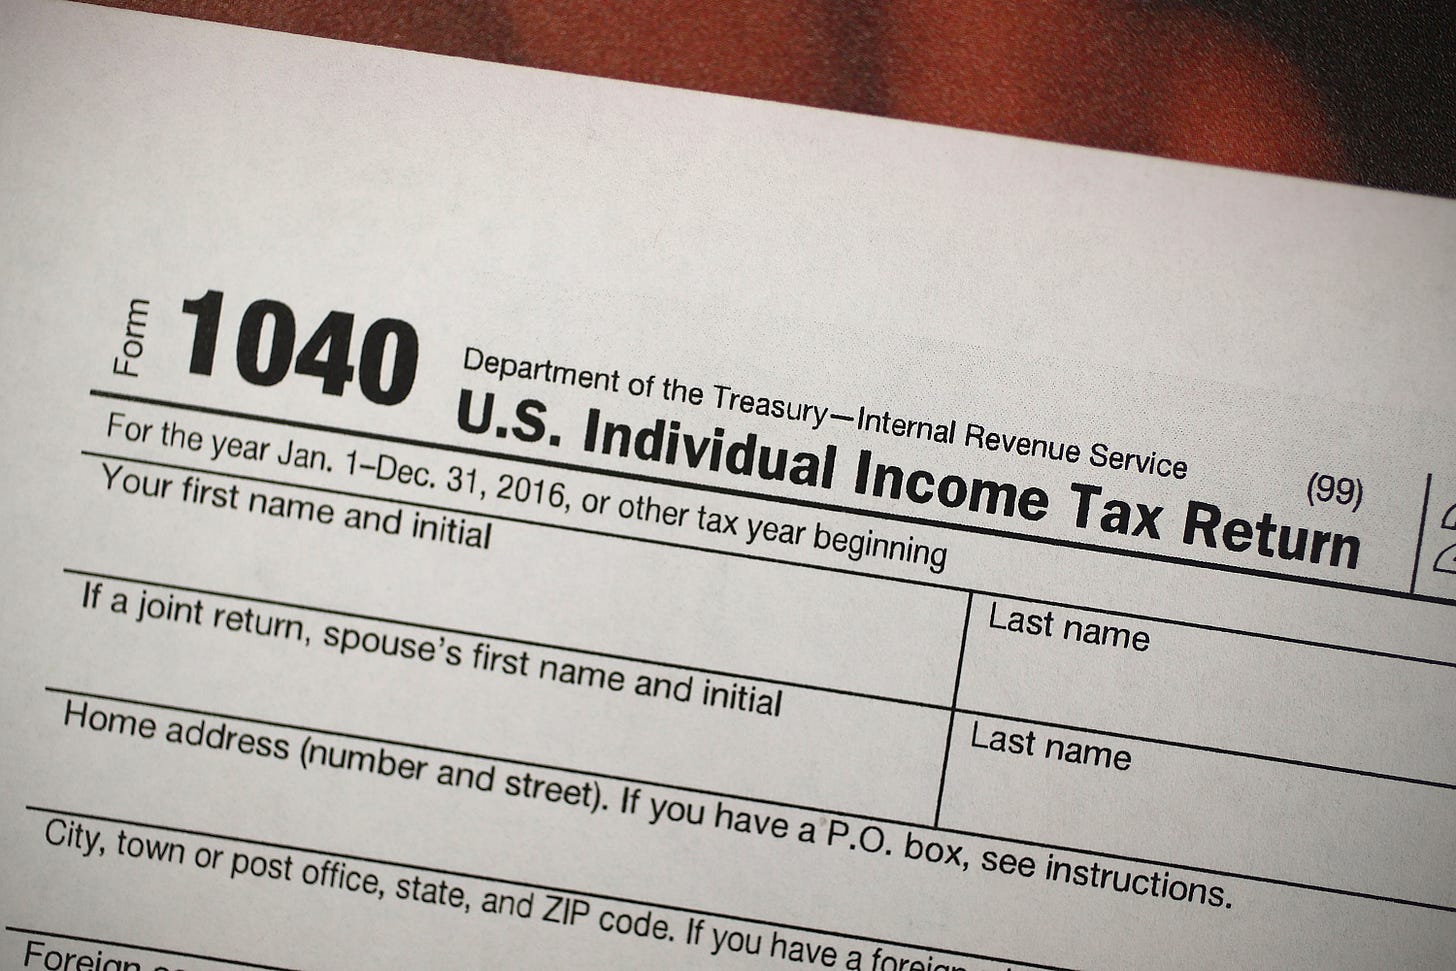 A copy of a IRS 1040 tax form is seen at an H&R Block office on the day President Donald Trump signed the Republican tax cut bill in Washington, DC on December 22, 2017 in Miami, Florida